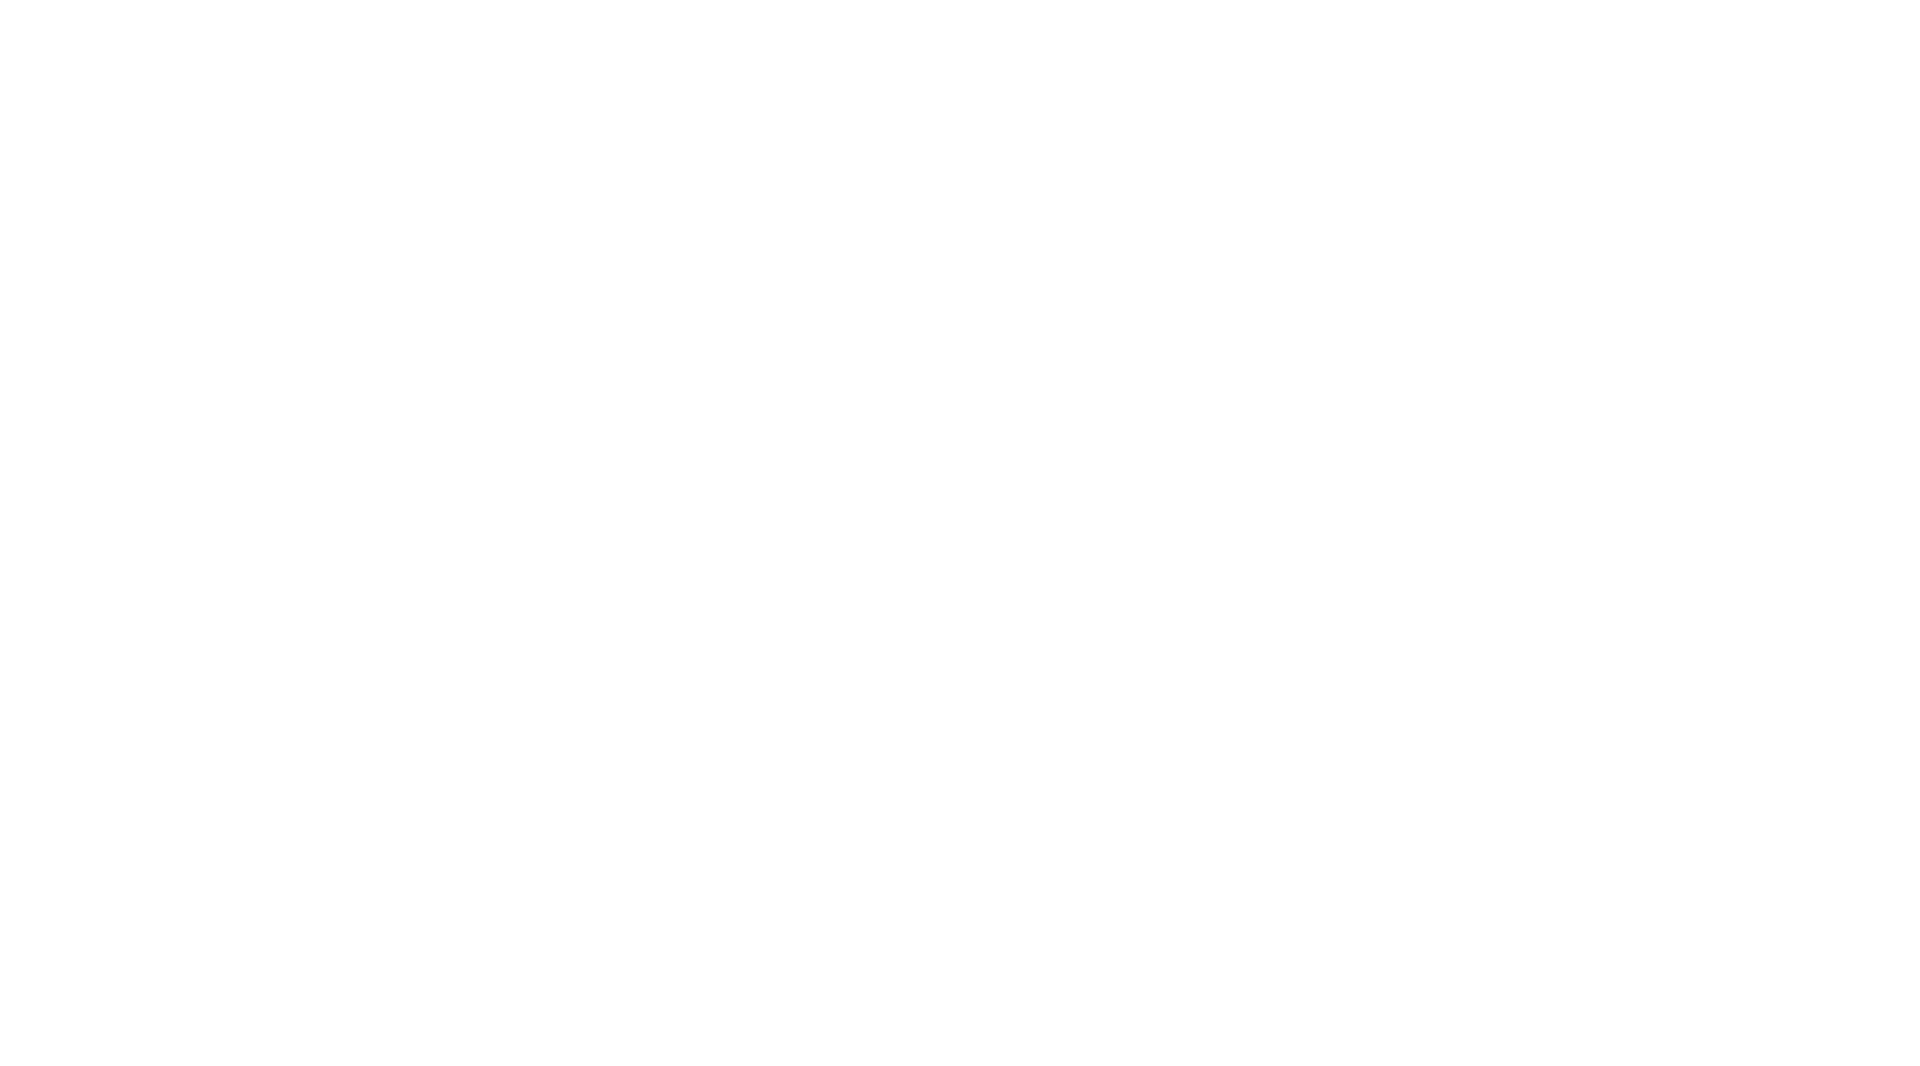 New York State Museum logo in white